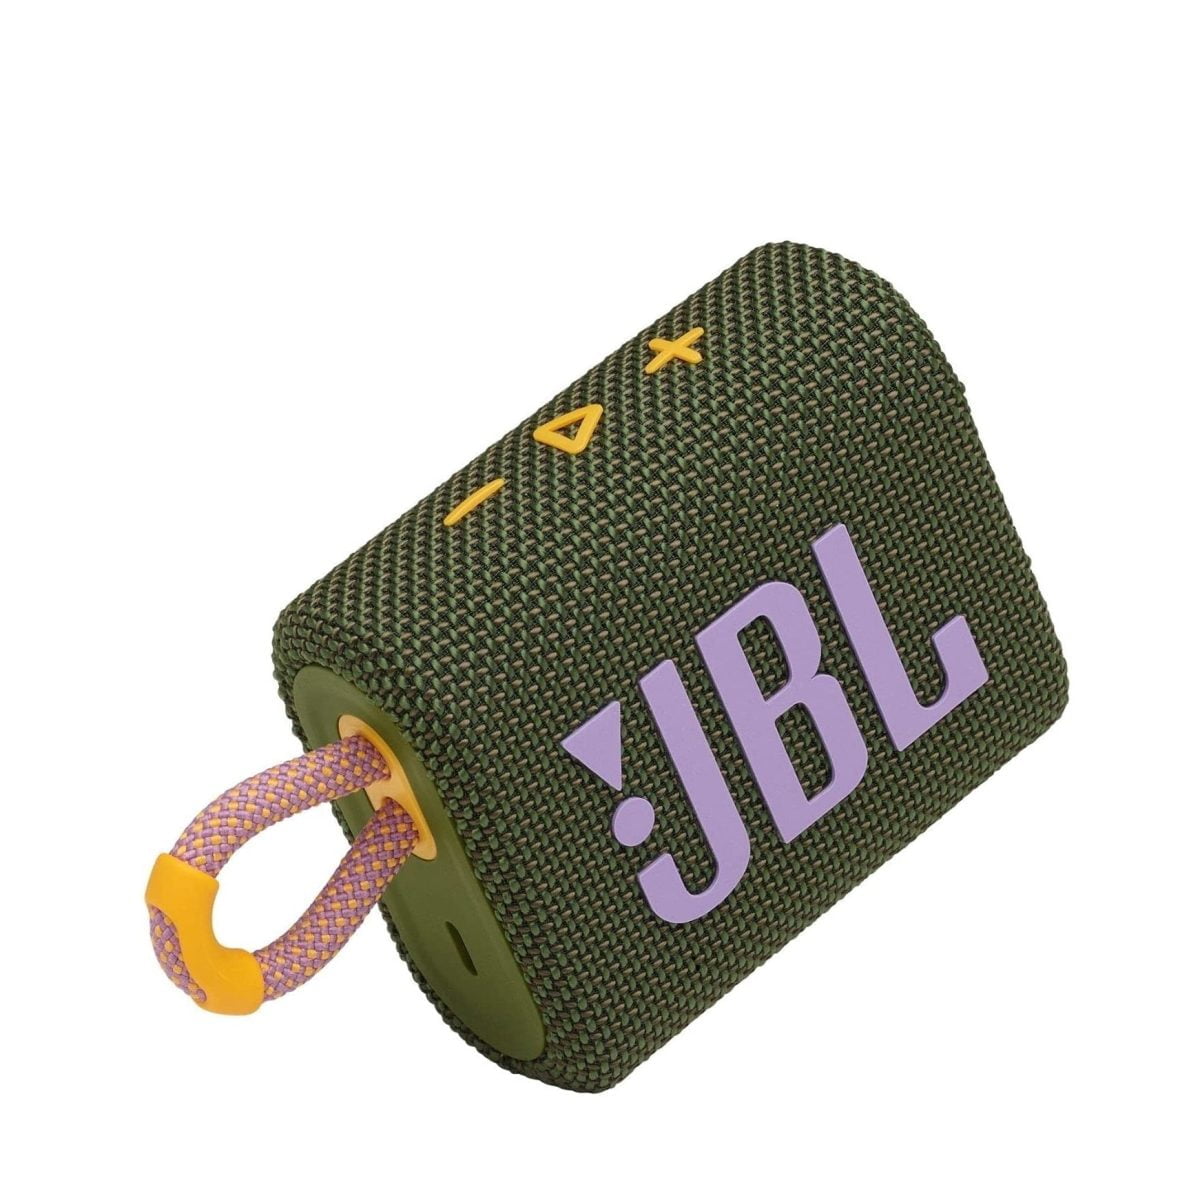 Jbl &Lt;H1&Gt;Jbl Go 3 Portable Waterproof Speaker - Green&Lt;/H1&Gt; Https://Www.youtube.com/Watch?V=Jjcejstflkq Jbl Go 3 Features Bold Styling And Rich Jbl Pro Sound. With Its New Eye-Catching Edgy Design, Colorful Fabrics And Expressive Details This A Must-Have Accessory For Your Next Outing. Your Tunes Will Lift You Up With Jbl Pro Sound, It’s Ip67 Waterproof And Dustproof So You Can Keep Listening Rain Or Shine, And With Its Integrated Loop, You Can Carry It Anywhere. Go 3 Comes In Completely New Shades And Color Combinations Inspired By Current Street Fashion. Jbl Go 3 Looks As Vivid As It Sounds. Jbl Speaker Jbl Go 3 Portable Waterproof Speaker - Green